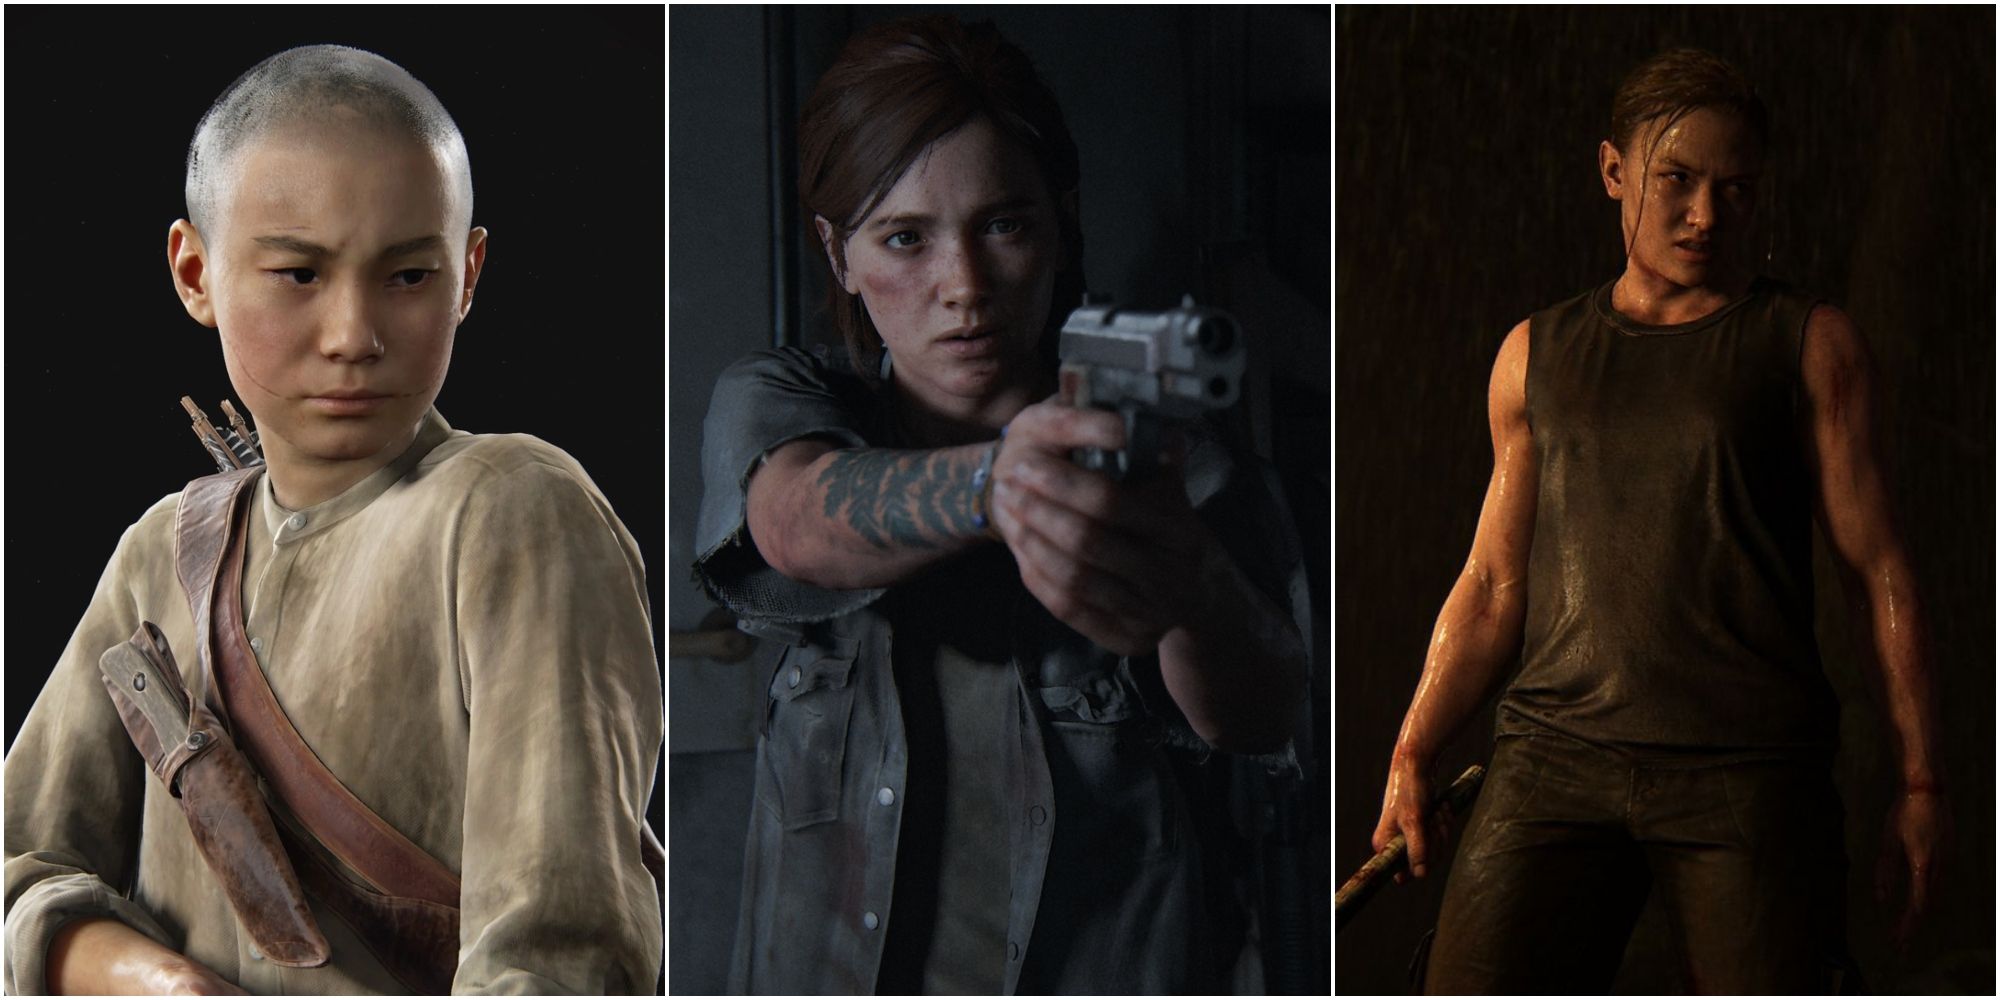 The Last of Us Part 2's Lev, Ellie and Abby